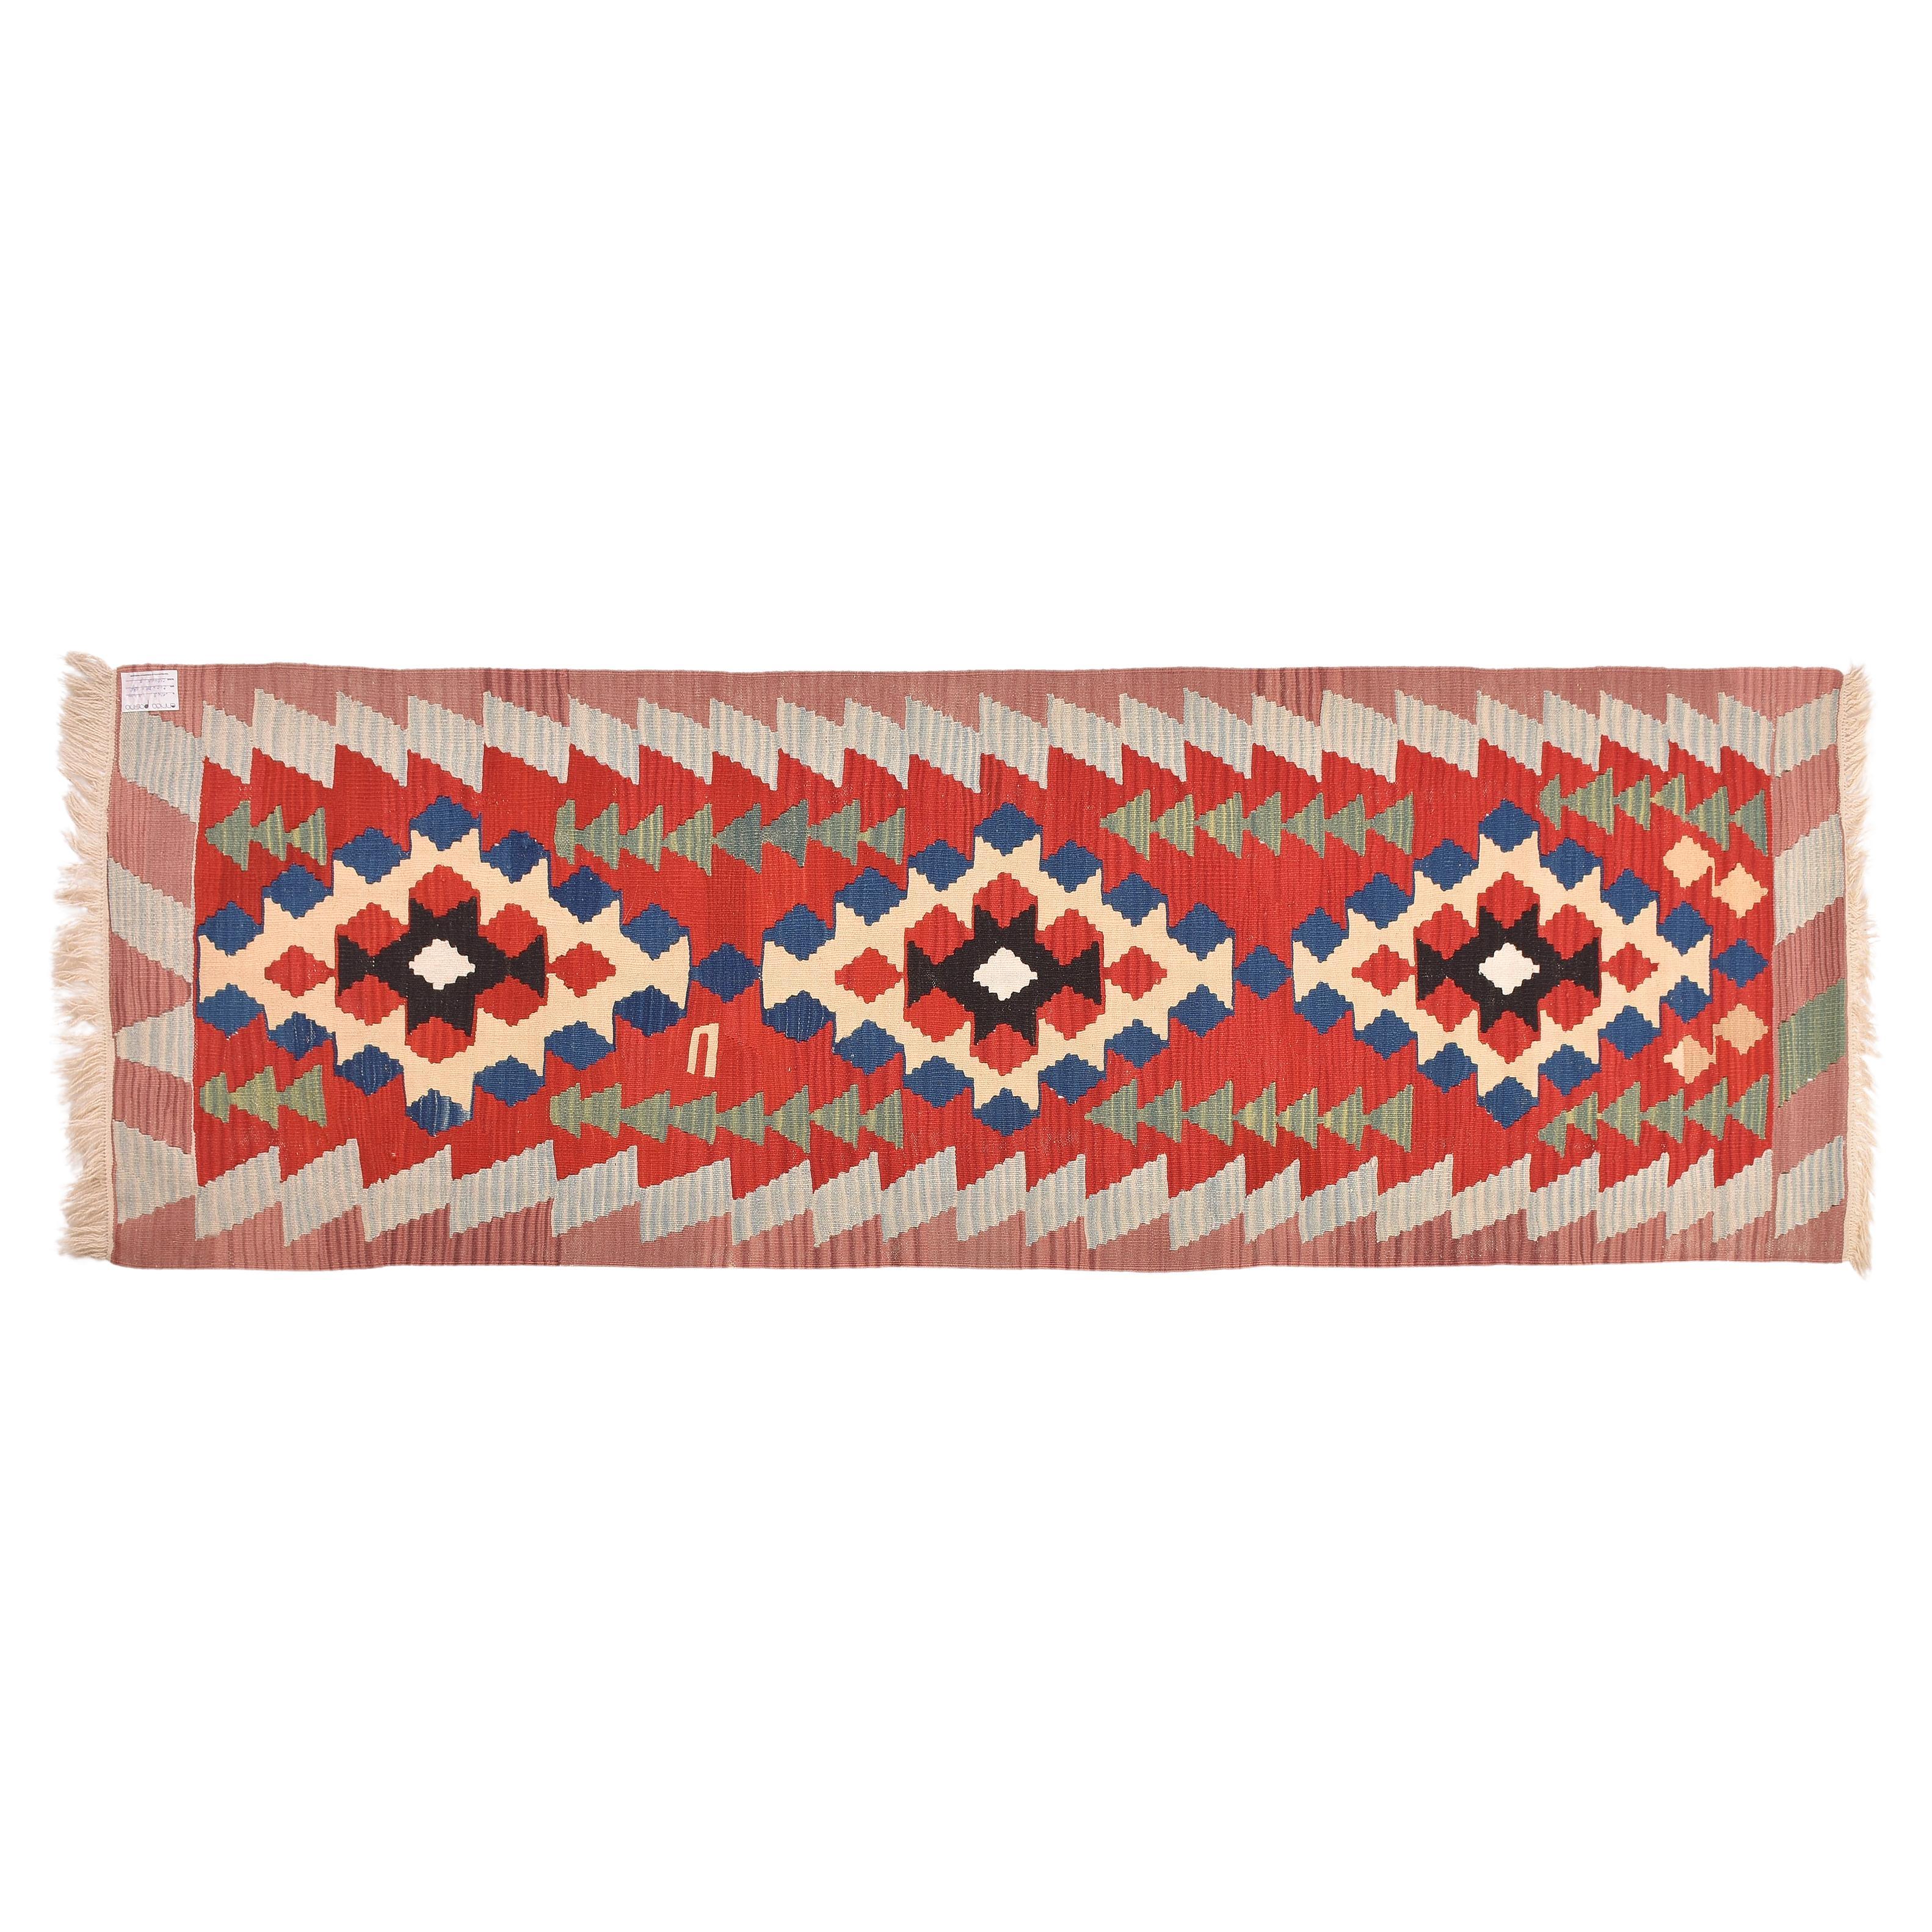 nr. 1143 -  Simple nice kilim runner with good weaving workmanship, easy to set up and use.
Also with a good price !